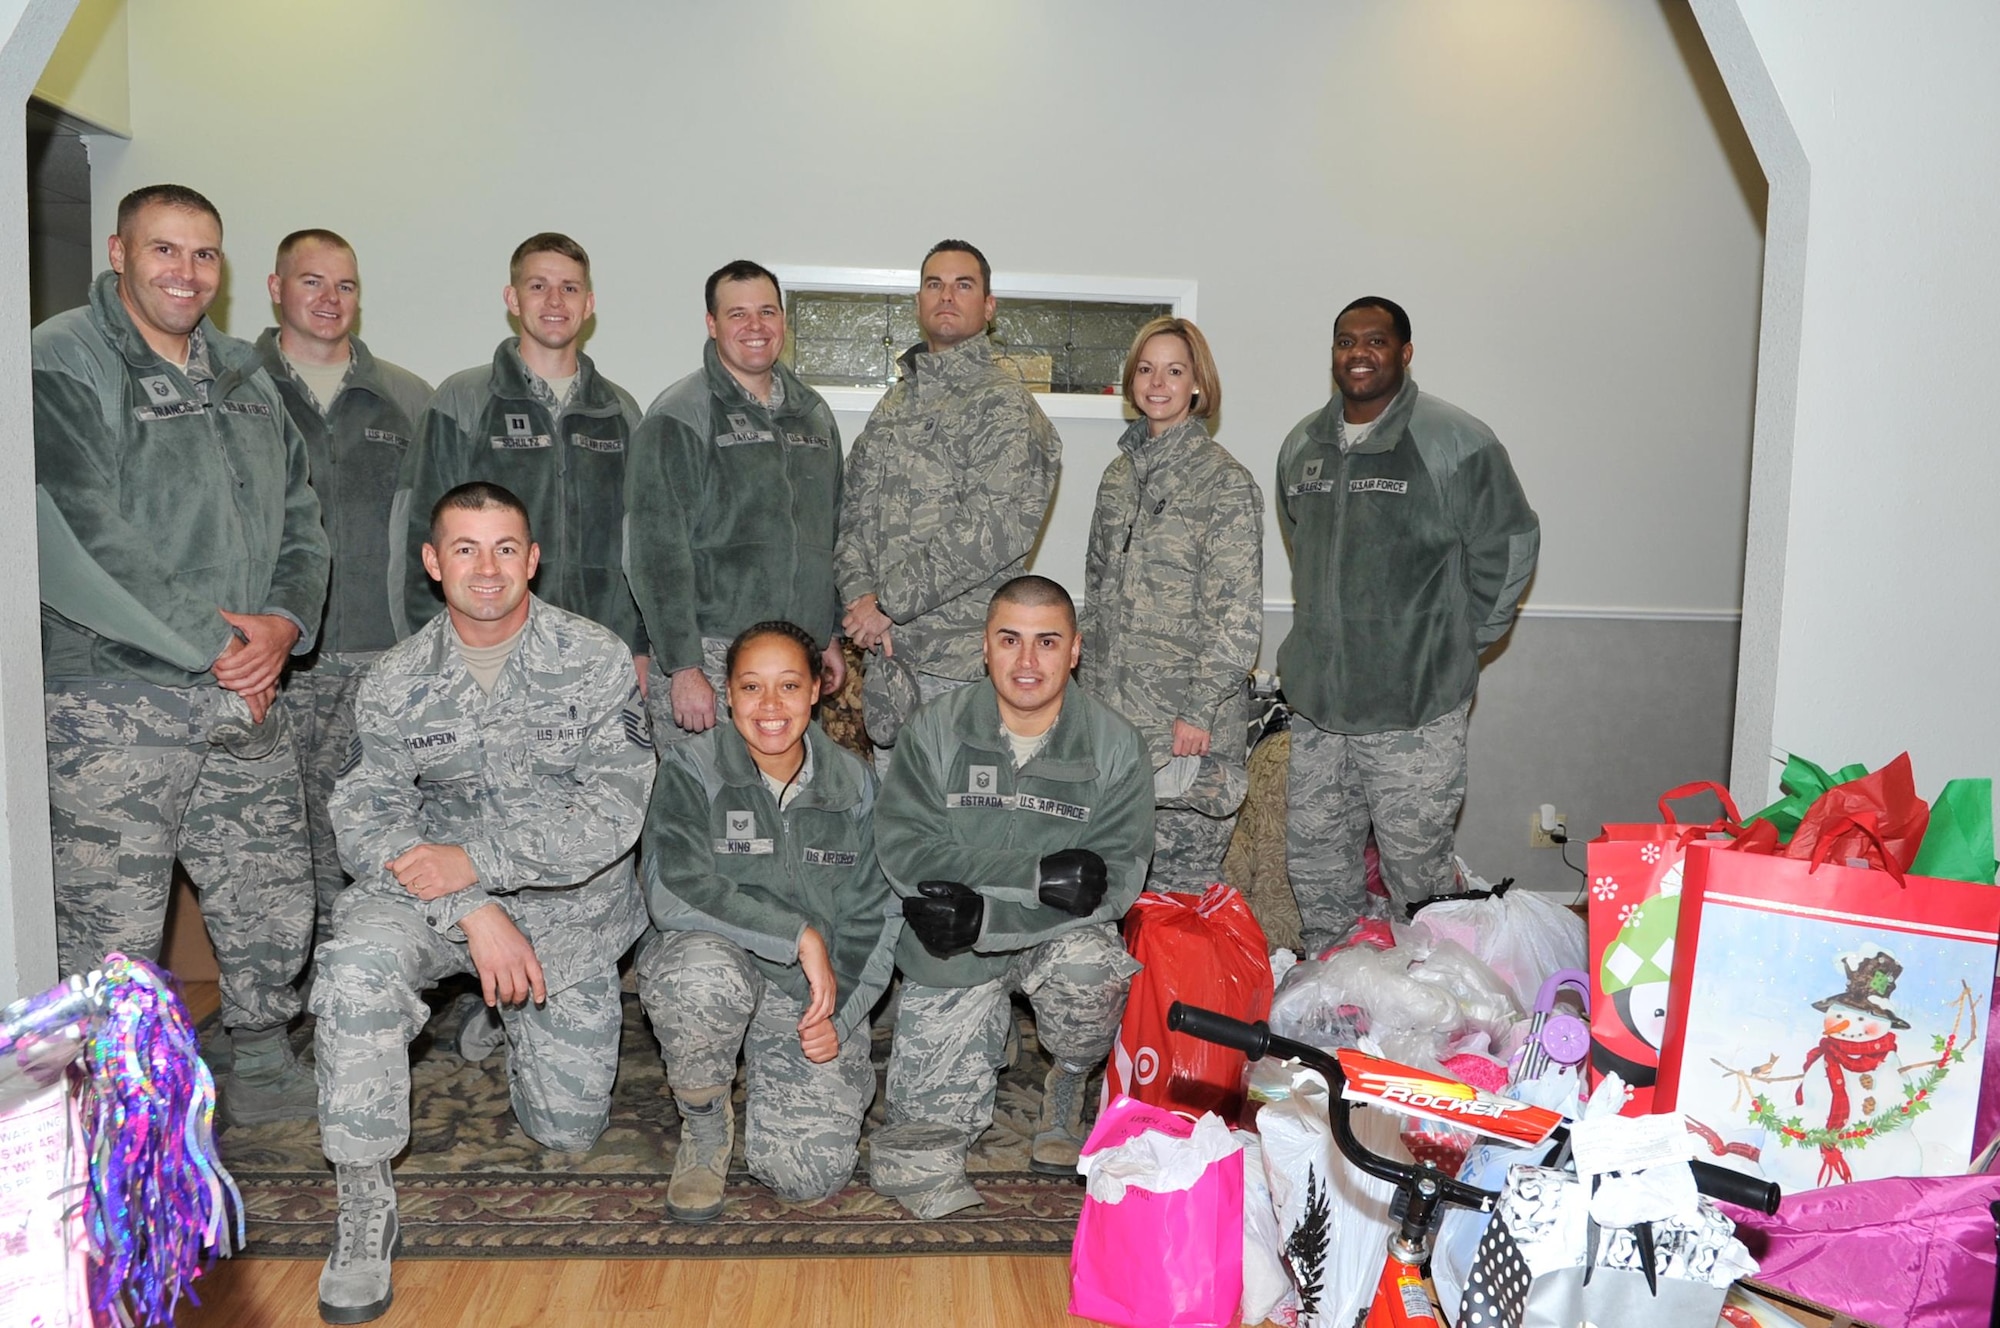 Goodfellow Air Force Base members after delivering toys to the Court Appointed Special Advocates for Children center, San Angelo, Texas, Dec. 8, 2016. Goodfellow members provided gifts for 340 children in emergency foster care. (U.S. Air Force photo by Staff Sgt. Laura R. McFarlane/Released)